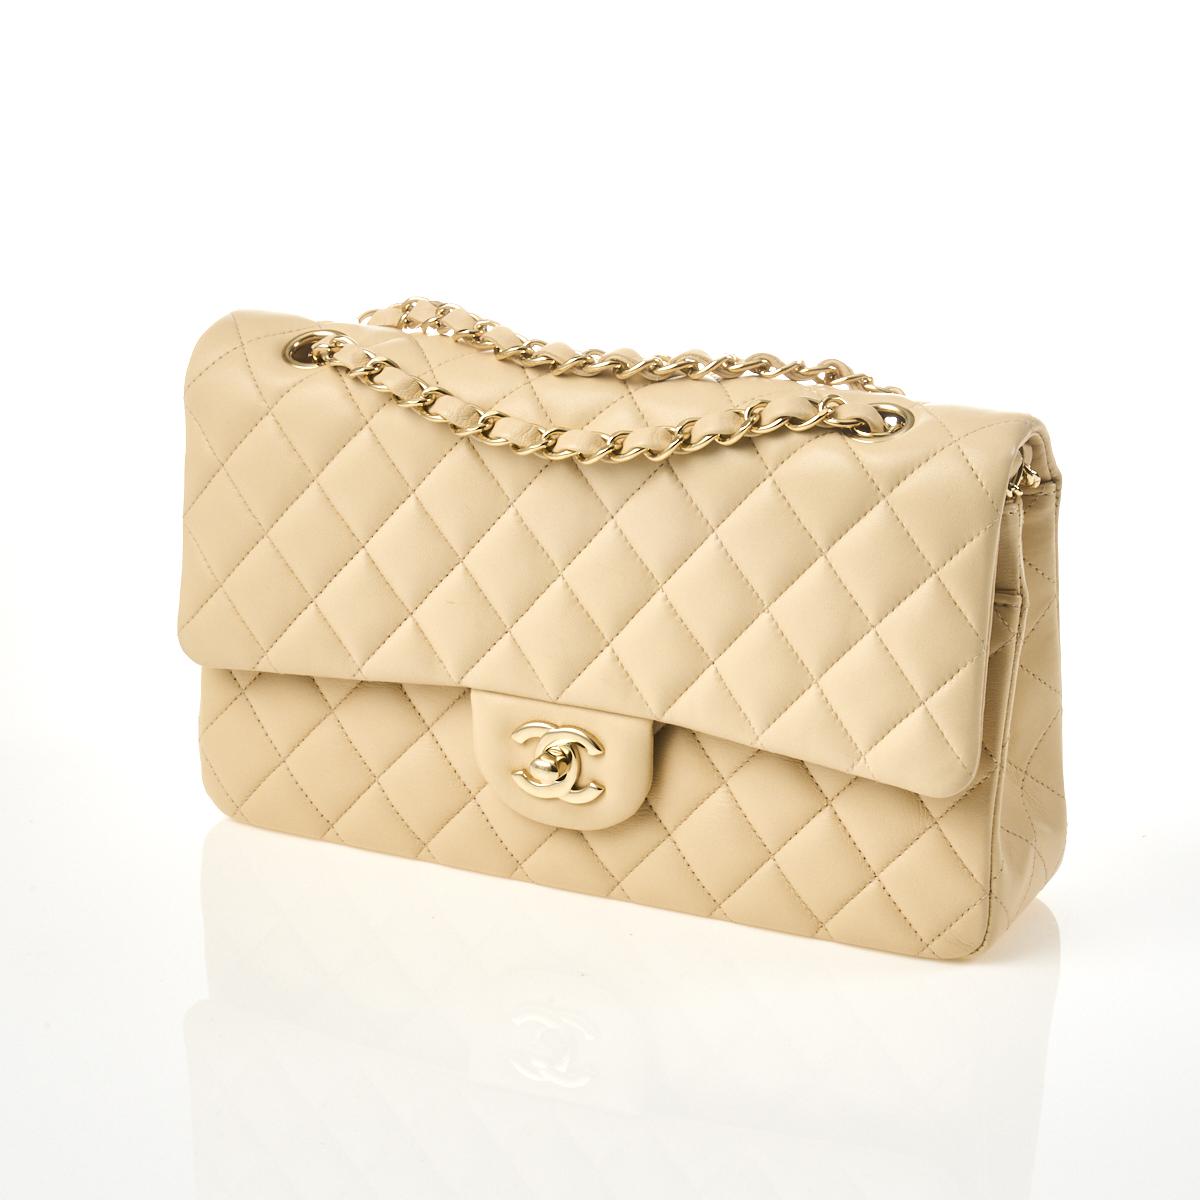 CHANEL Vintage Cream Lambskin Bag Chain Strap Made in France 